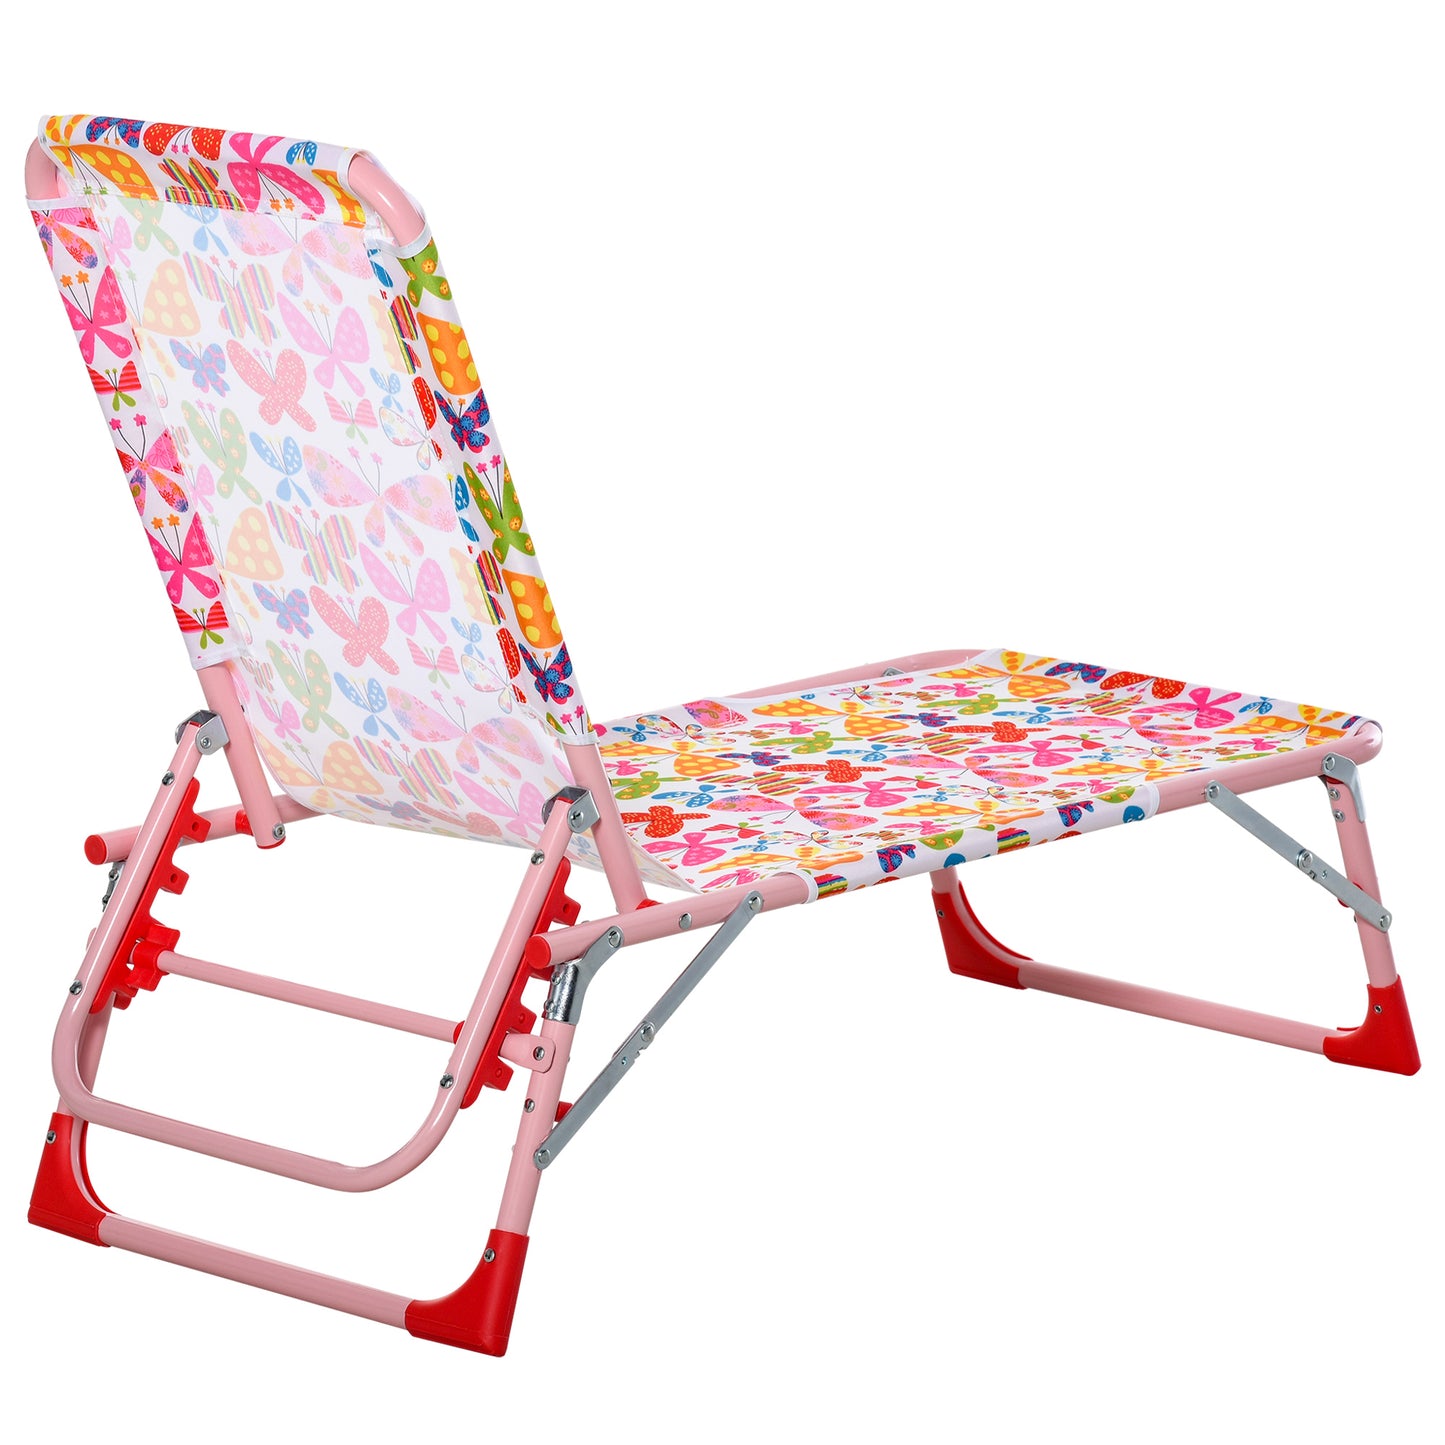 Outsunny Lounge Chair for Kids Recliner Foldable Lightweight with Adjustable Backrest